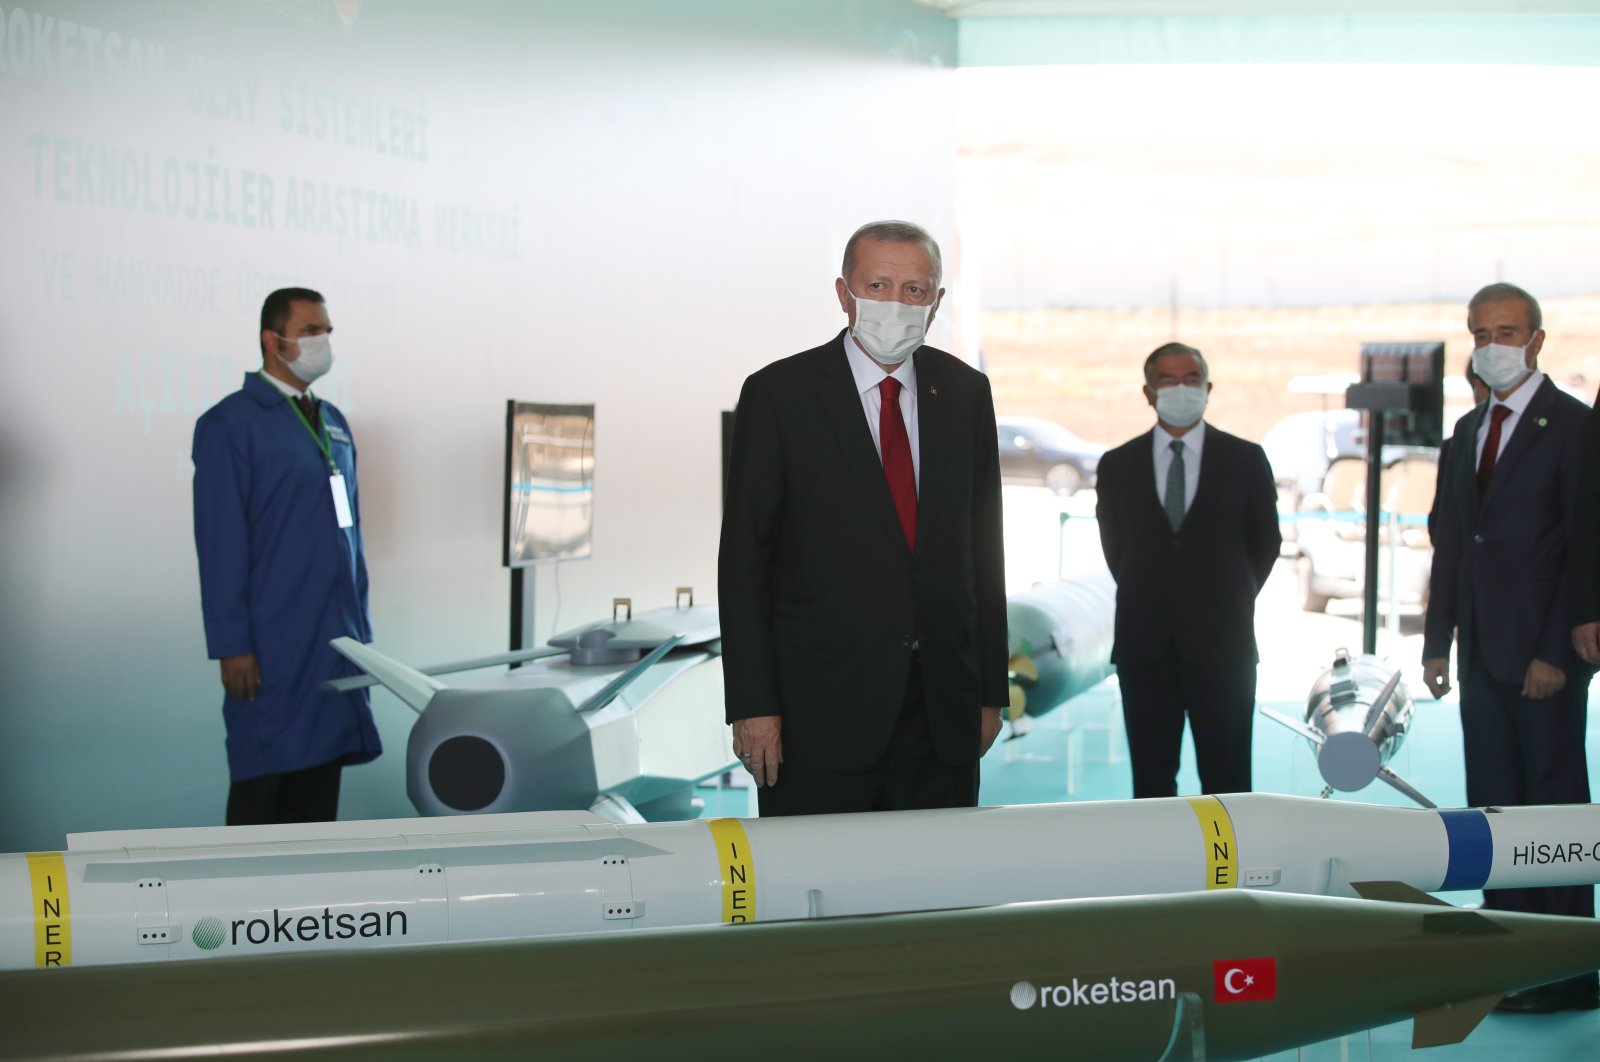 President Recep Tayyip Erdoğan visits Roketsan's Rocket Launch, Space Systems and Advanced Technologies Research Center in Ankara, Aug. 30, 2020. (AA Photo)